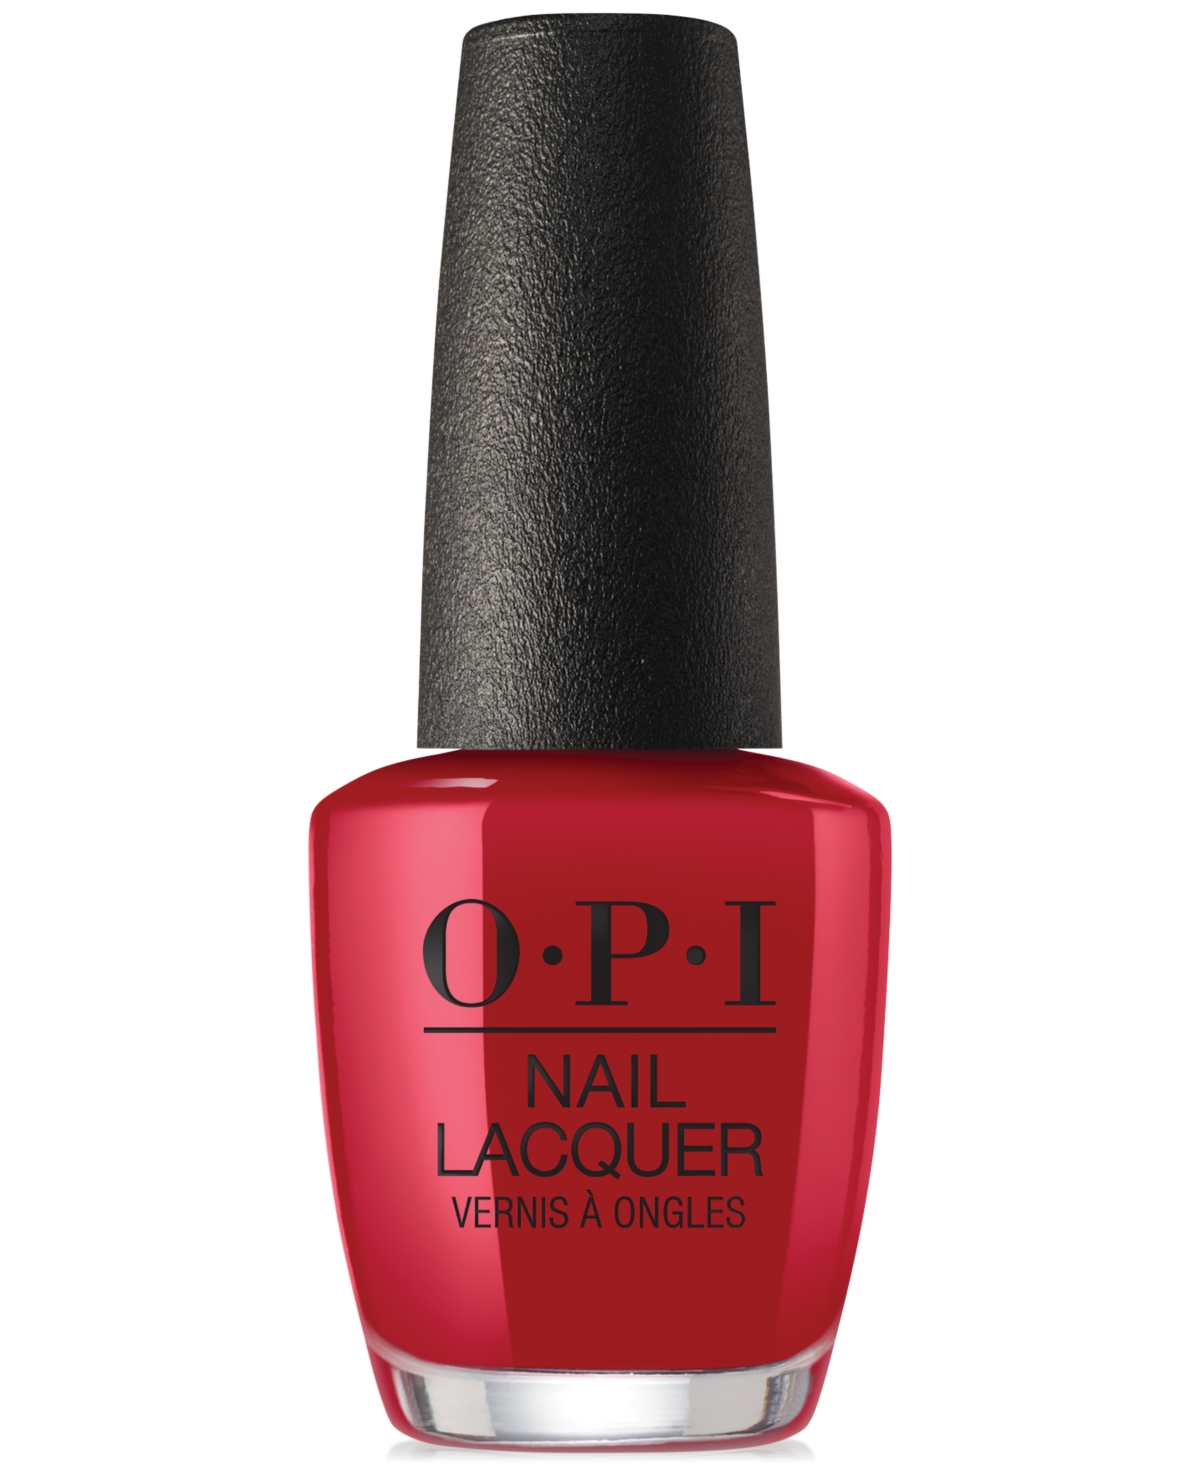 Opi Nail Lacquer In The Thrill Of Brazil